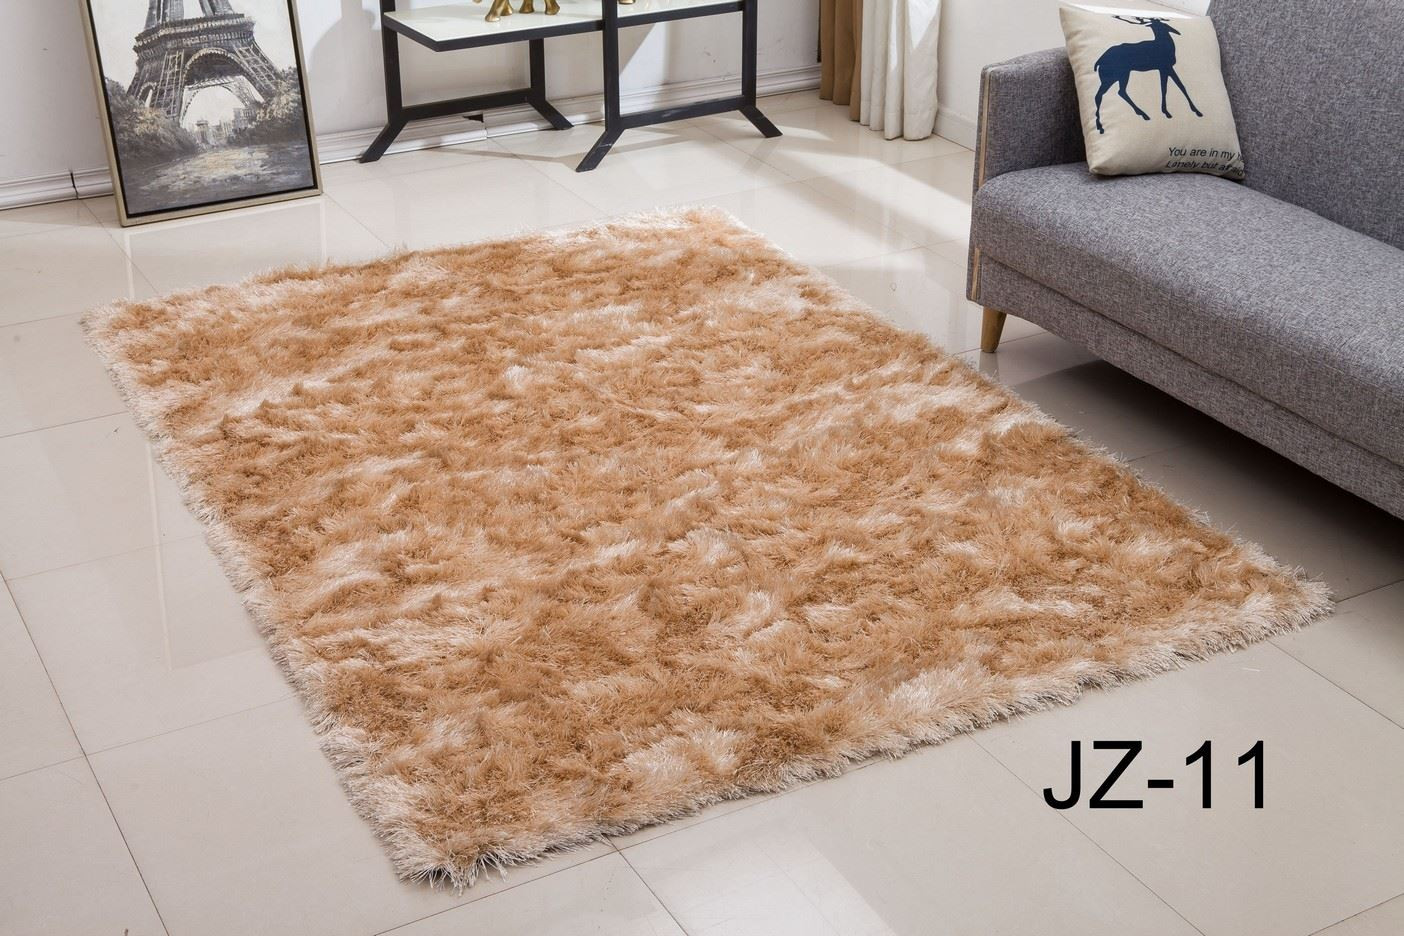 Shaggy Living Room Rugs
 Small And Size Thick Plain Soft Shaggy Living Room